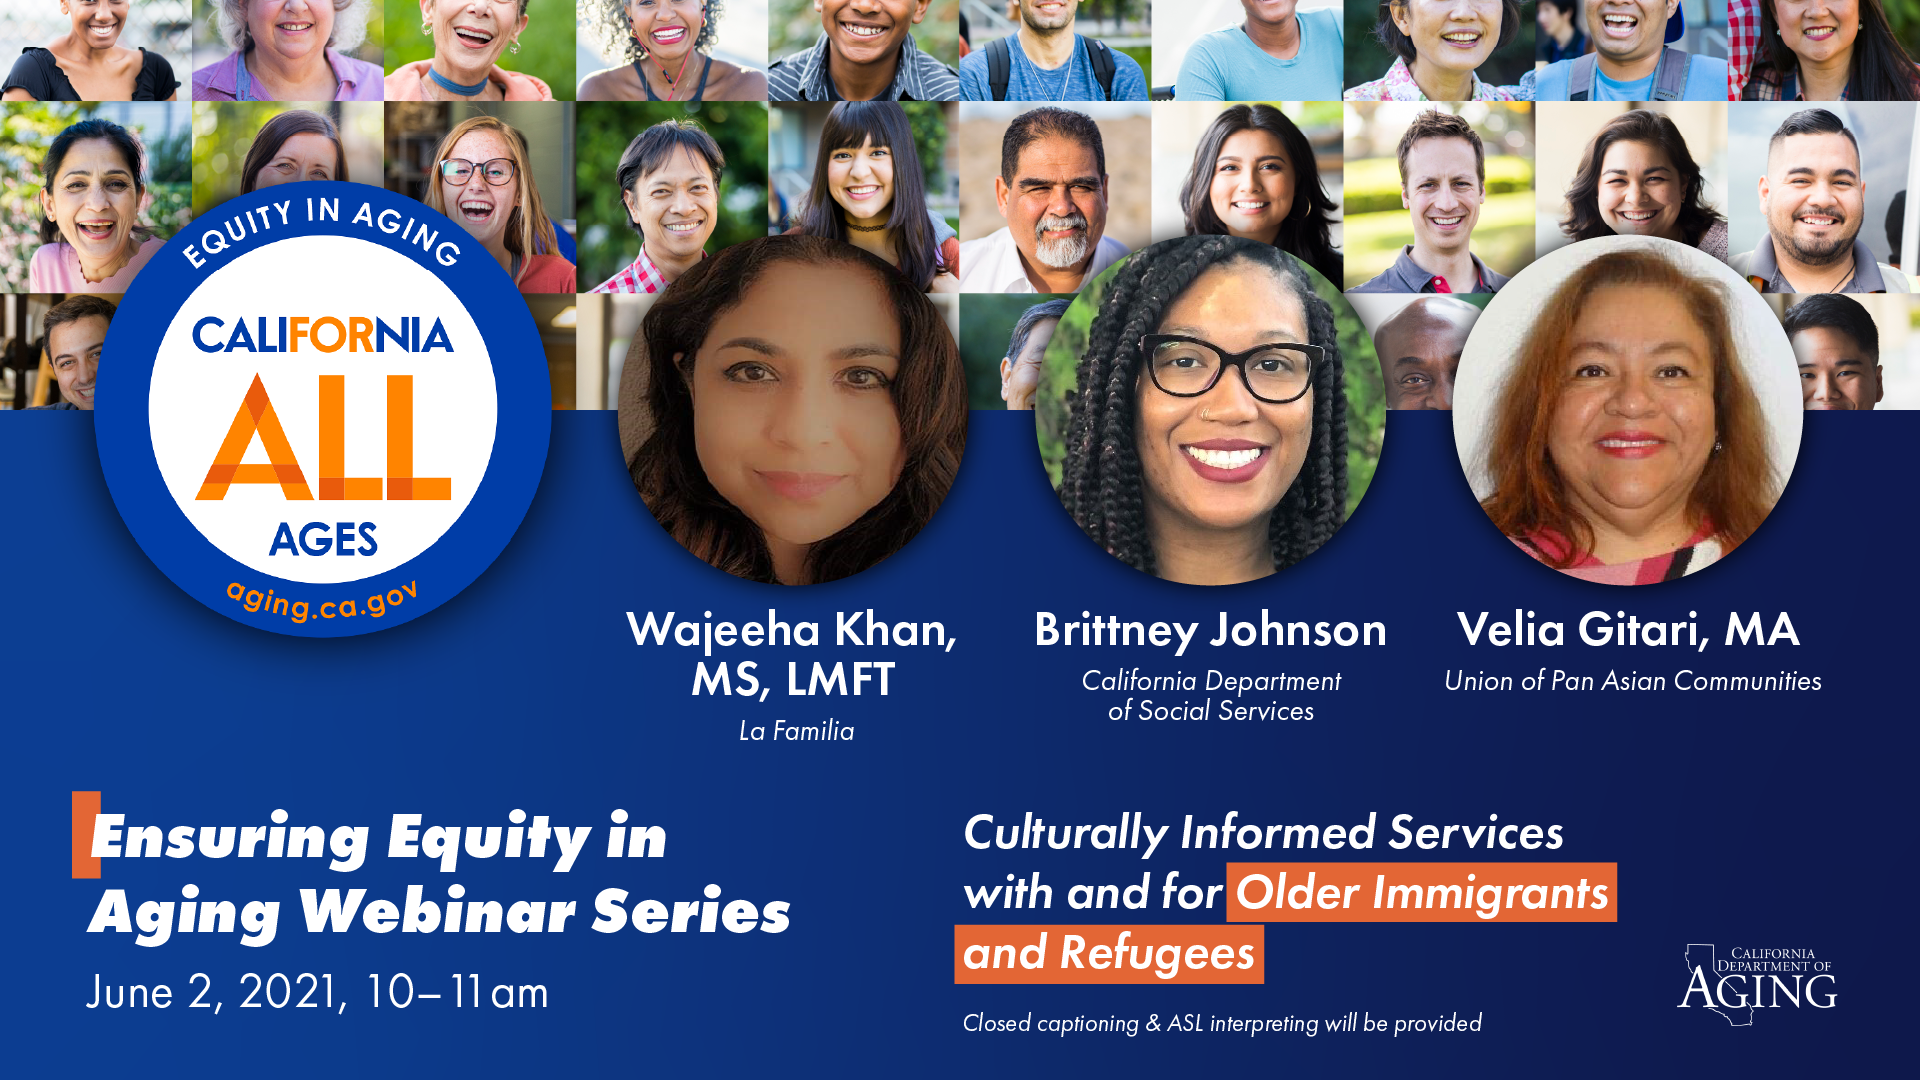 Graphic text and images. Ensuring Equity in Aging Webinar Series; Culturally Responsive Programs with and for Older Immigrants and Refugees. June 2, 2021, 10 to 11 am. Includes a background collage of diverse older adults; the California for All Ages, Equity in Aging logo is overlayed to the left. To the right, there are three headshots of the featured presenters, including Wajeeta Kahn of La Familia, Brittney Johnson from the California Department of Social Services, and Velia Gitari from the Union of Pan Asian Communities. The Department of Aging logo is visible in the bottom right-hand corner.